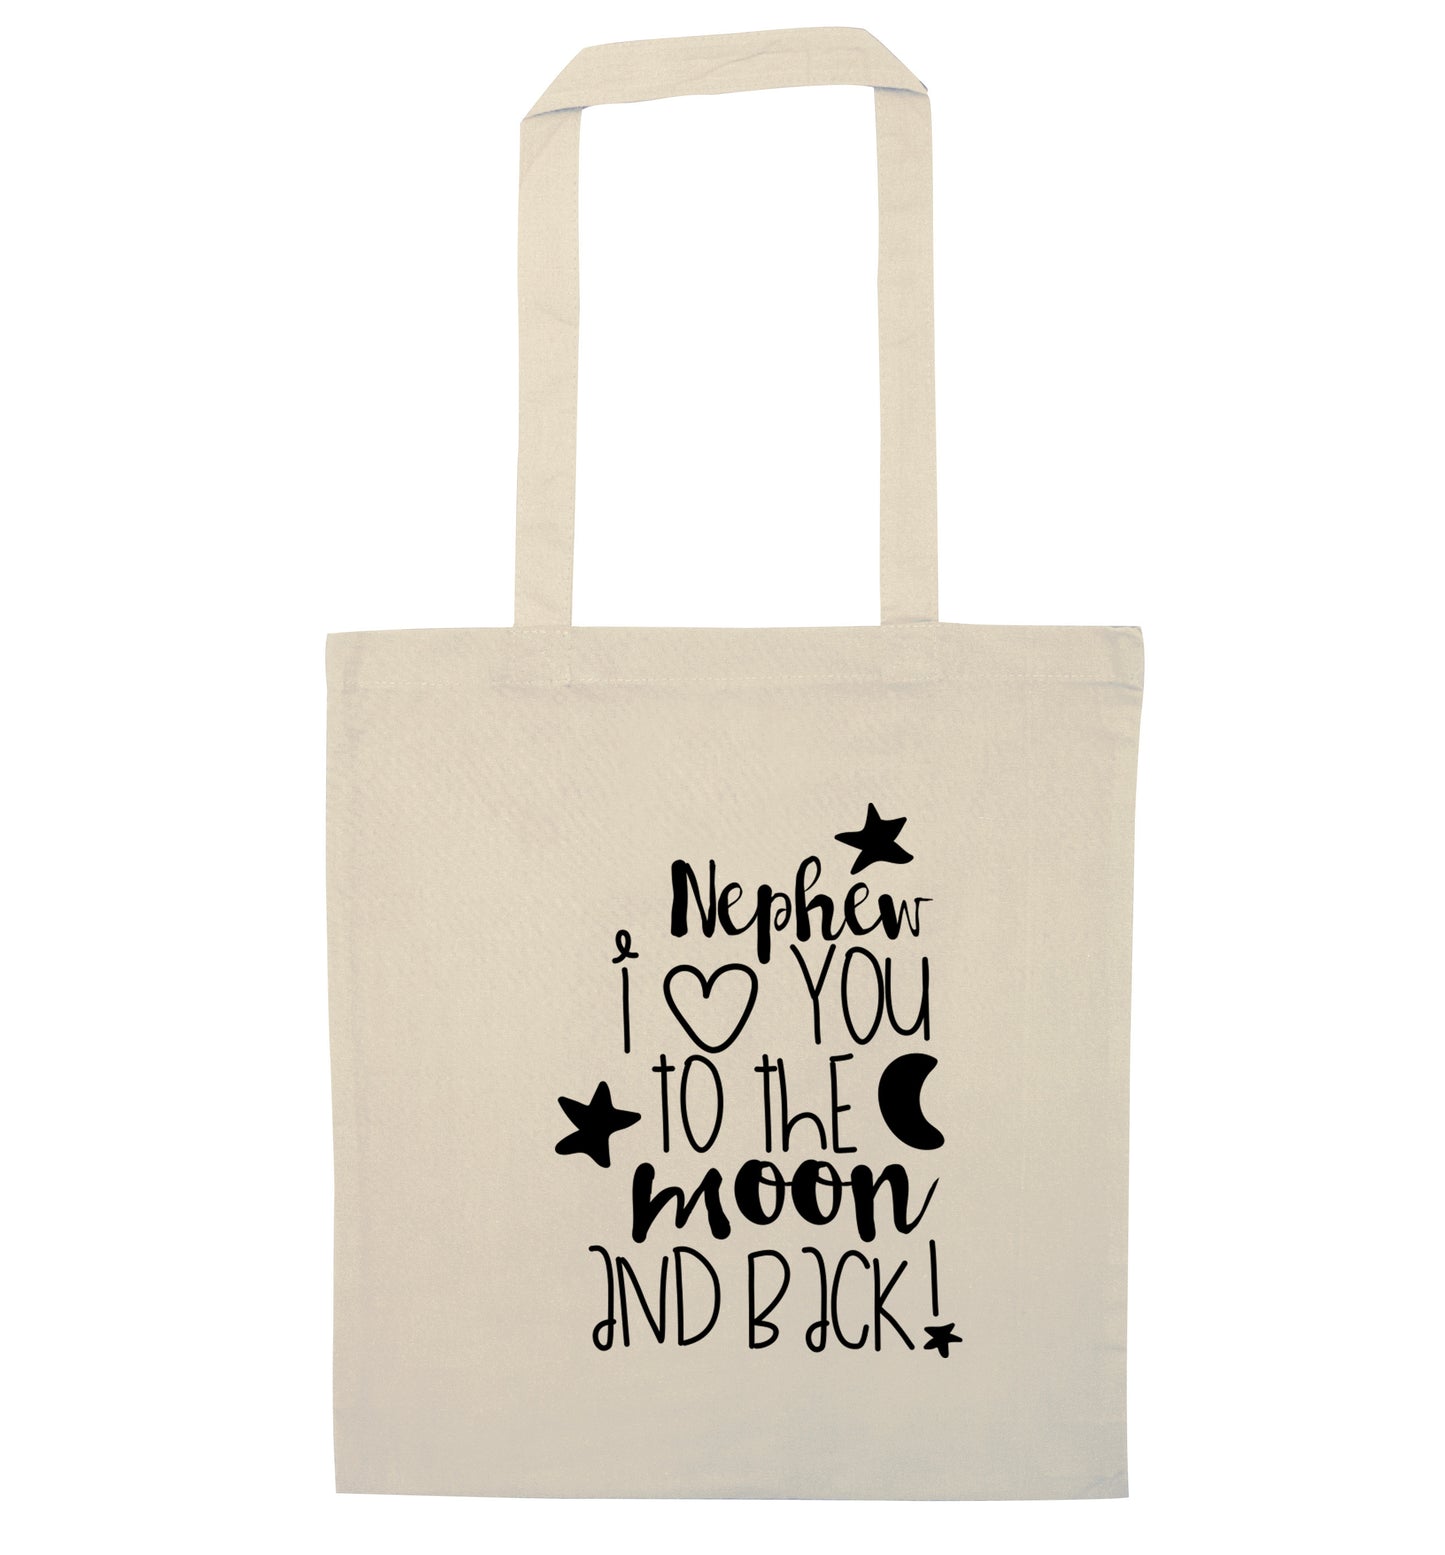 Nephew I love you to the moon and back natural tote bag